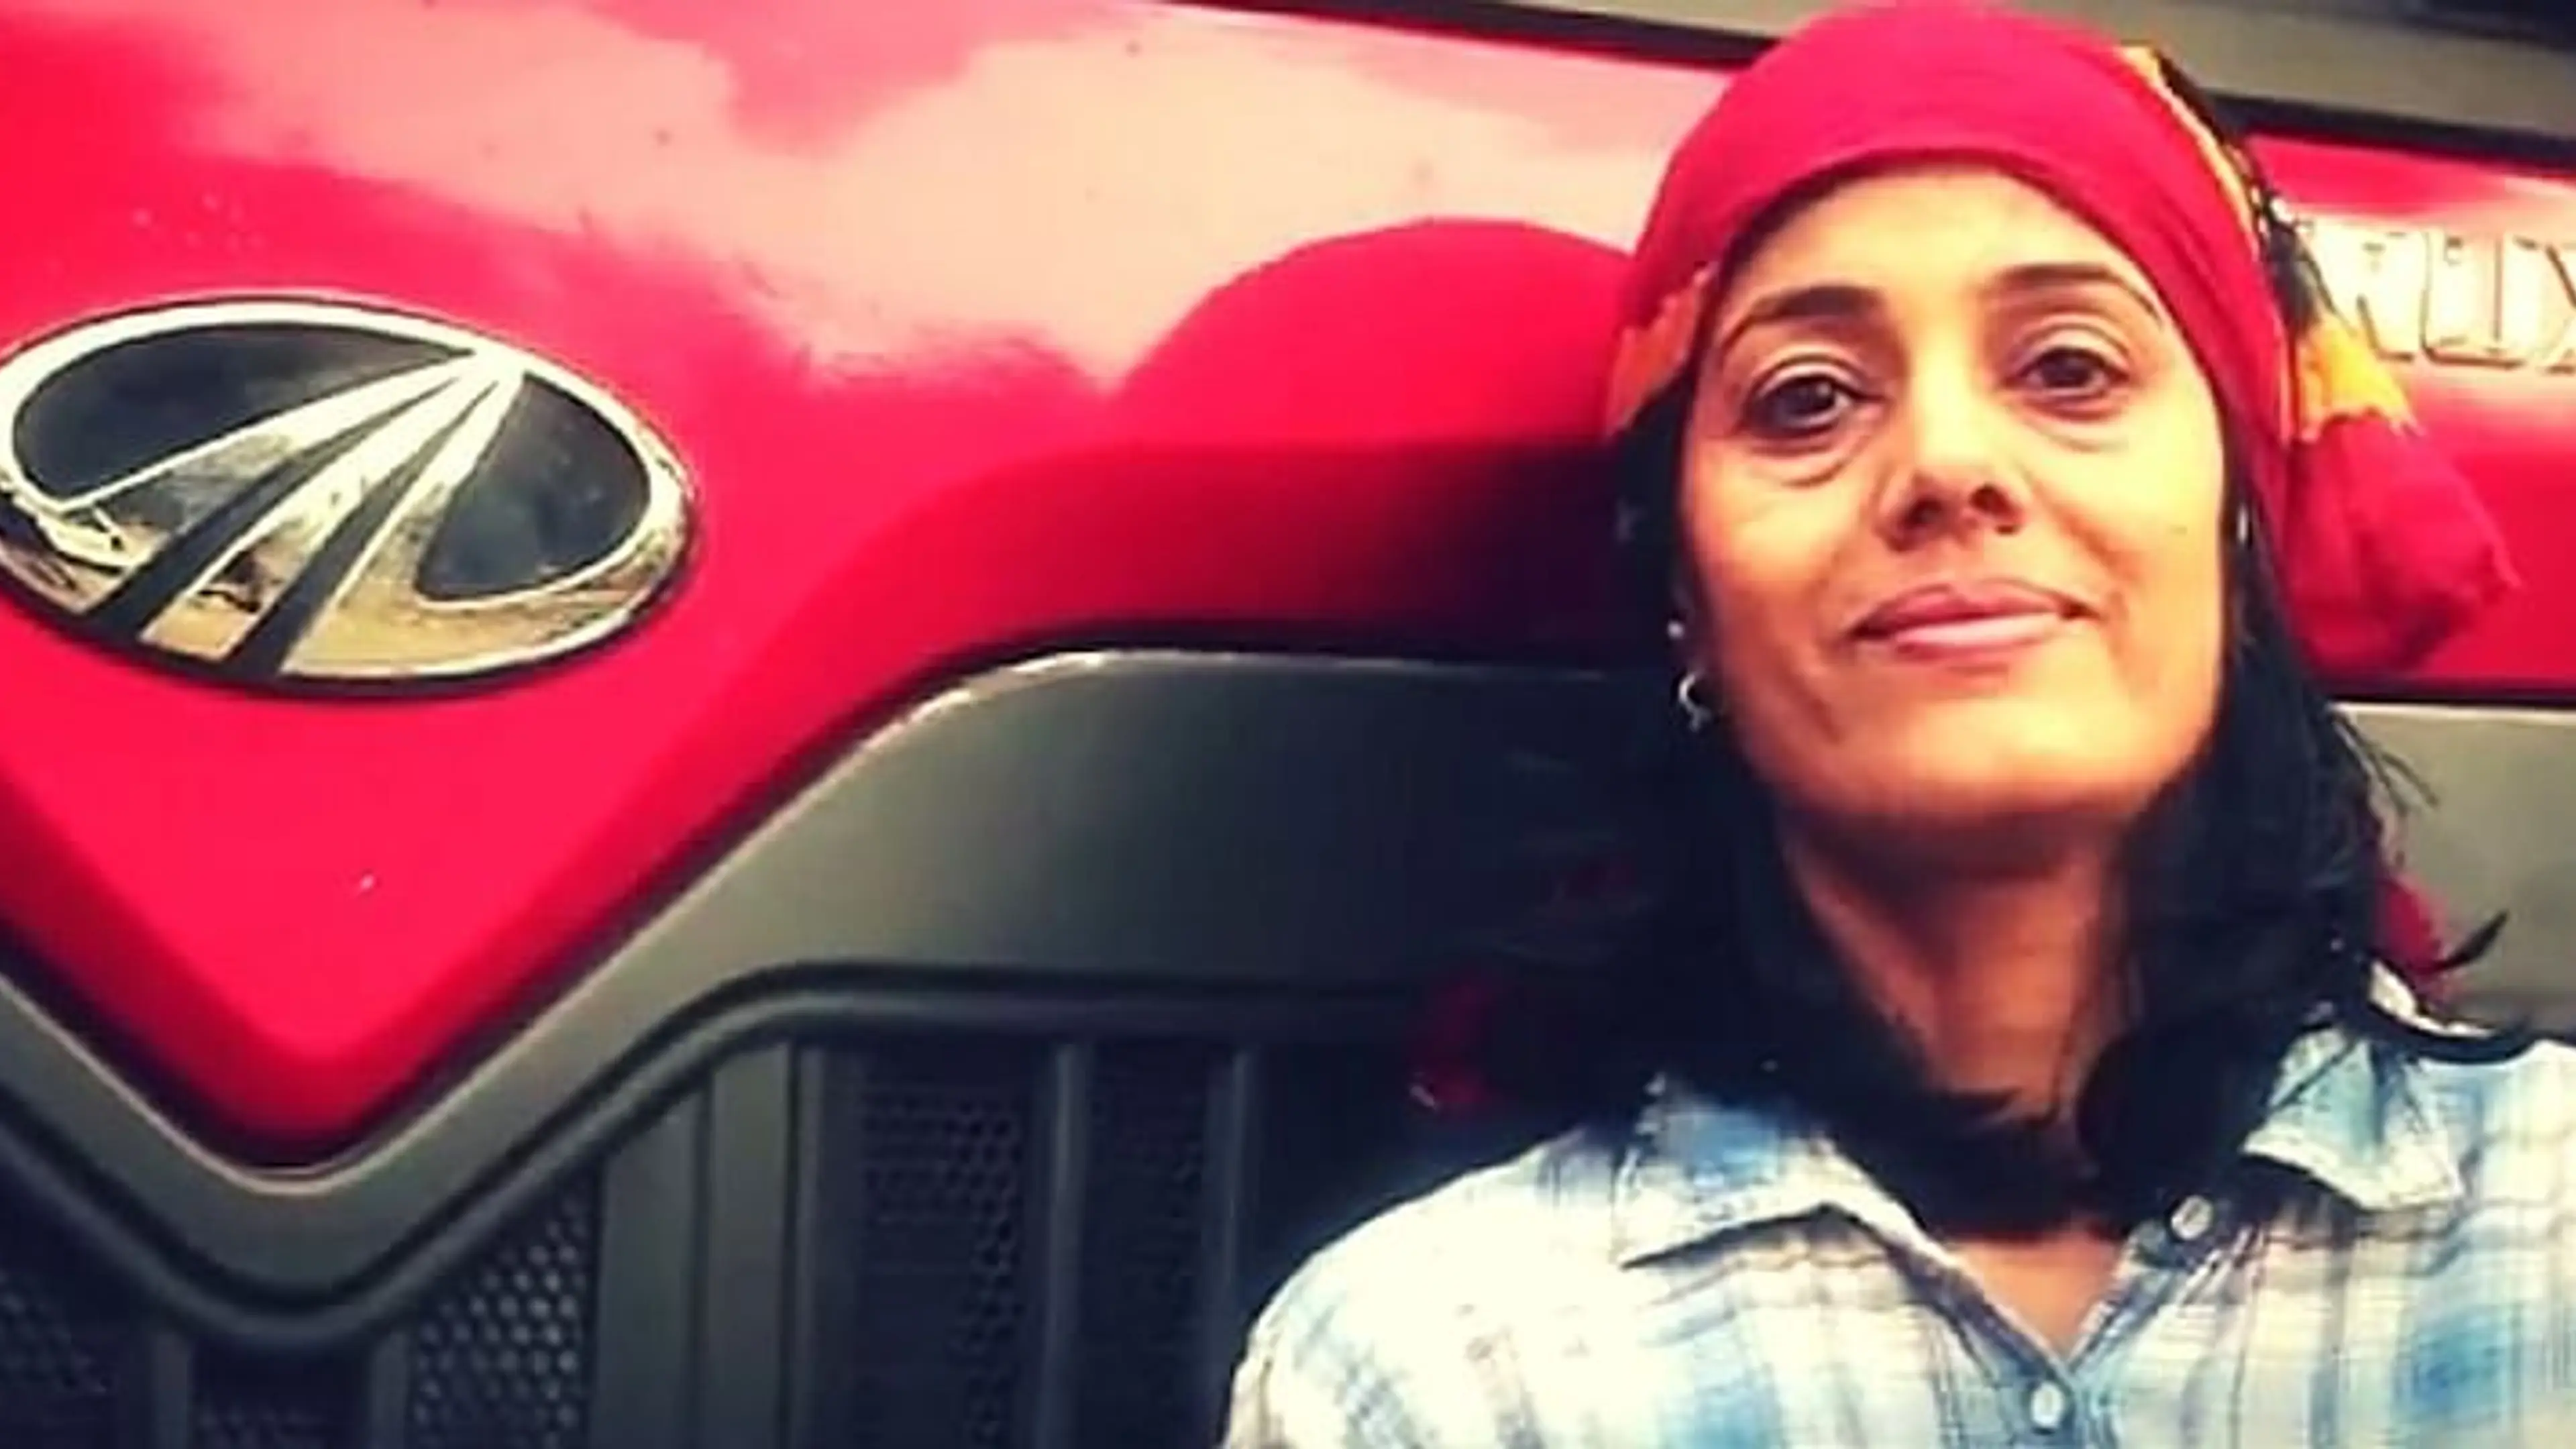 Women’s Day: Why this qualified lawyer became India’s first woman truck driver 

